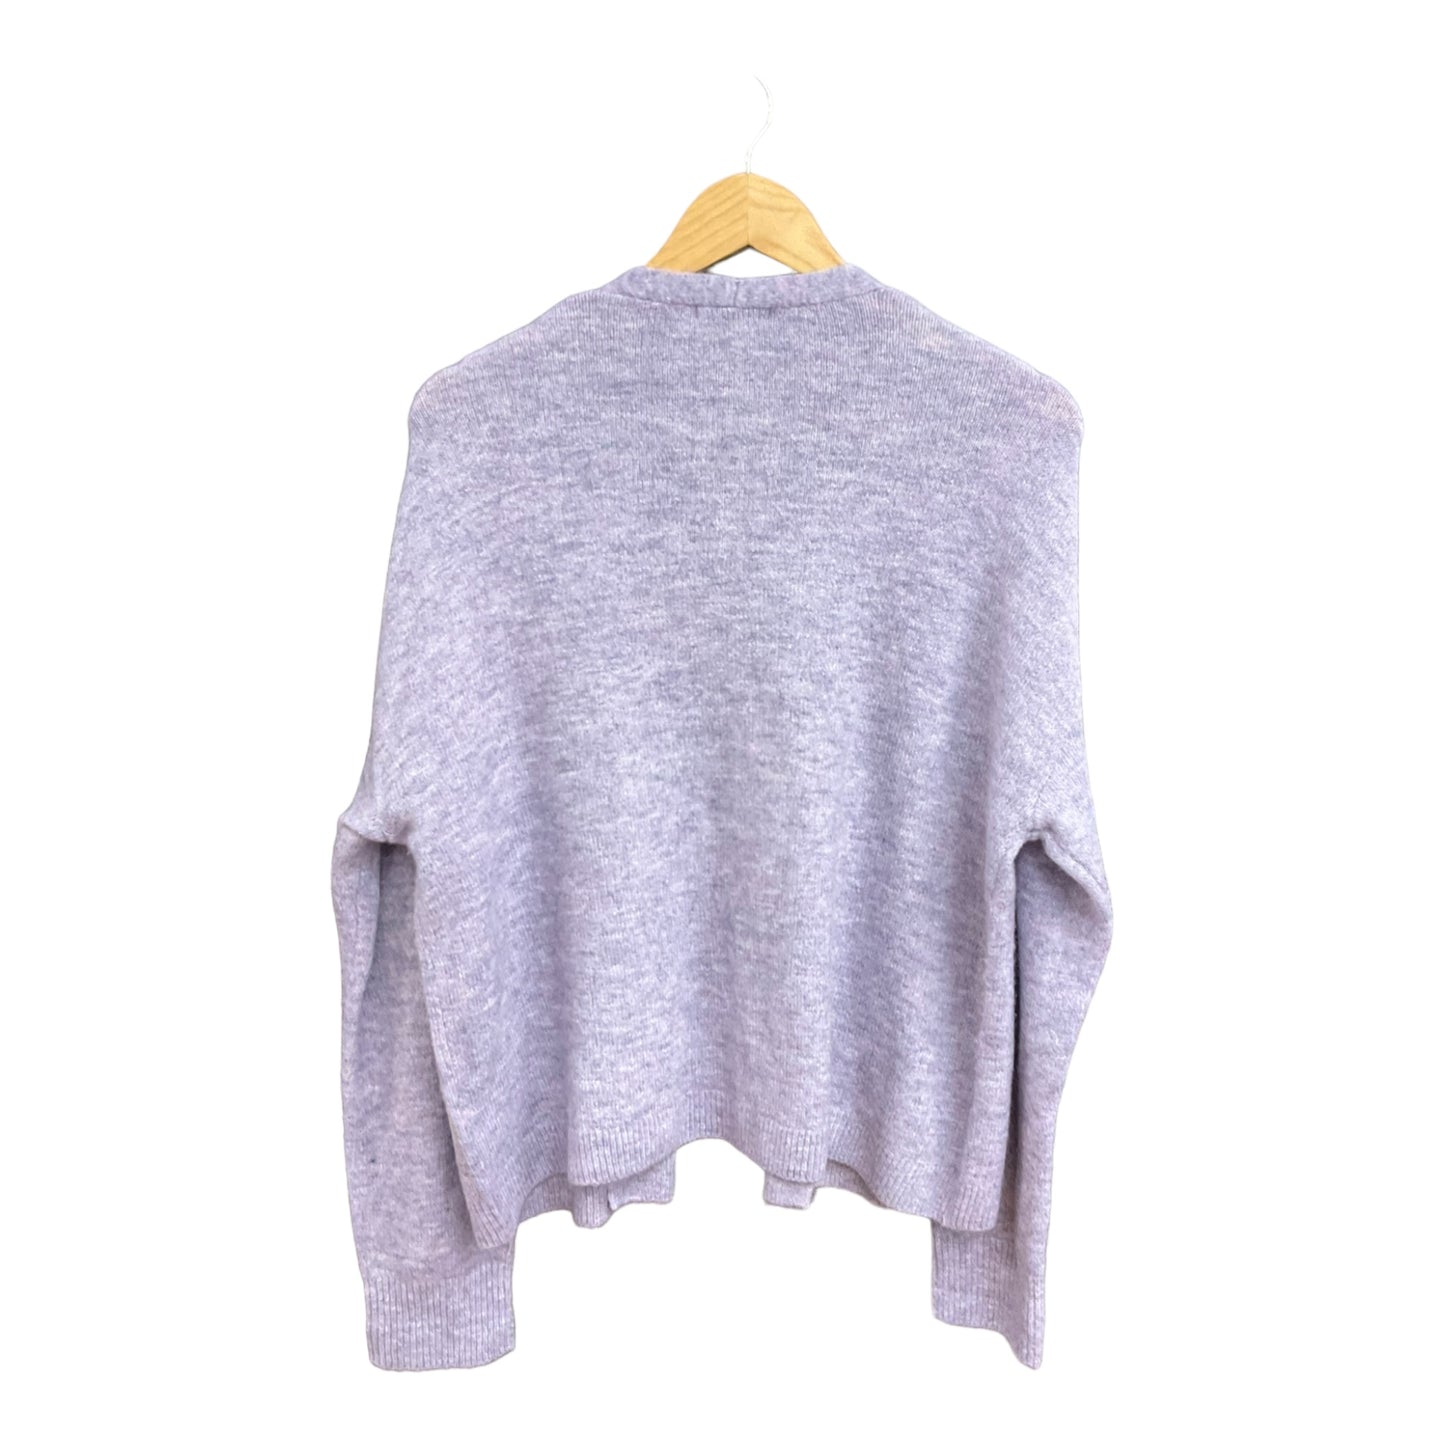 Sweater Cardigan By H&m  Size: M